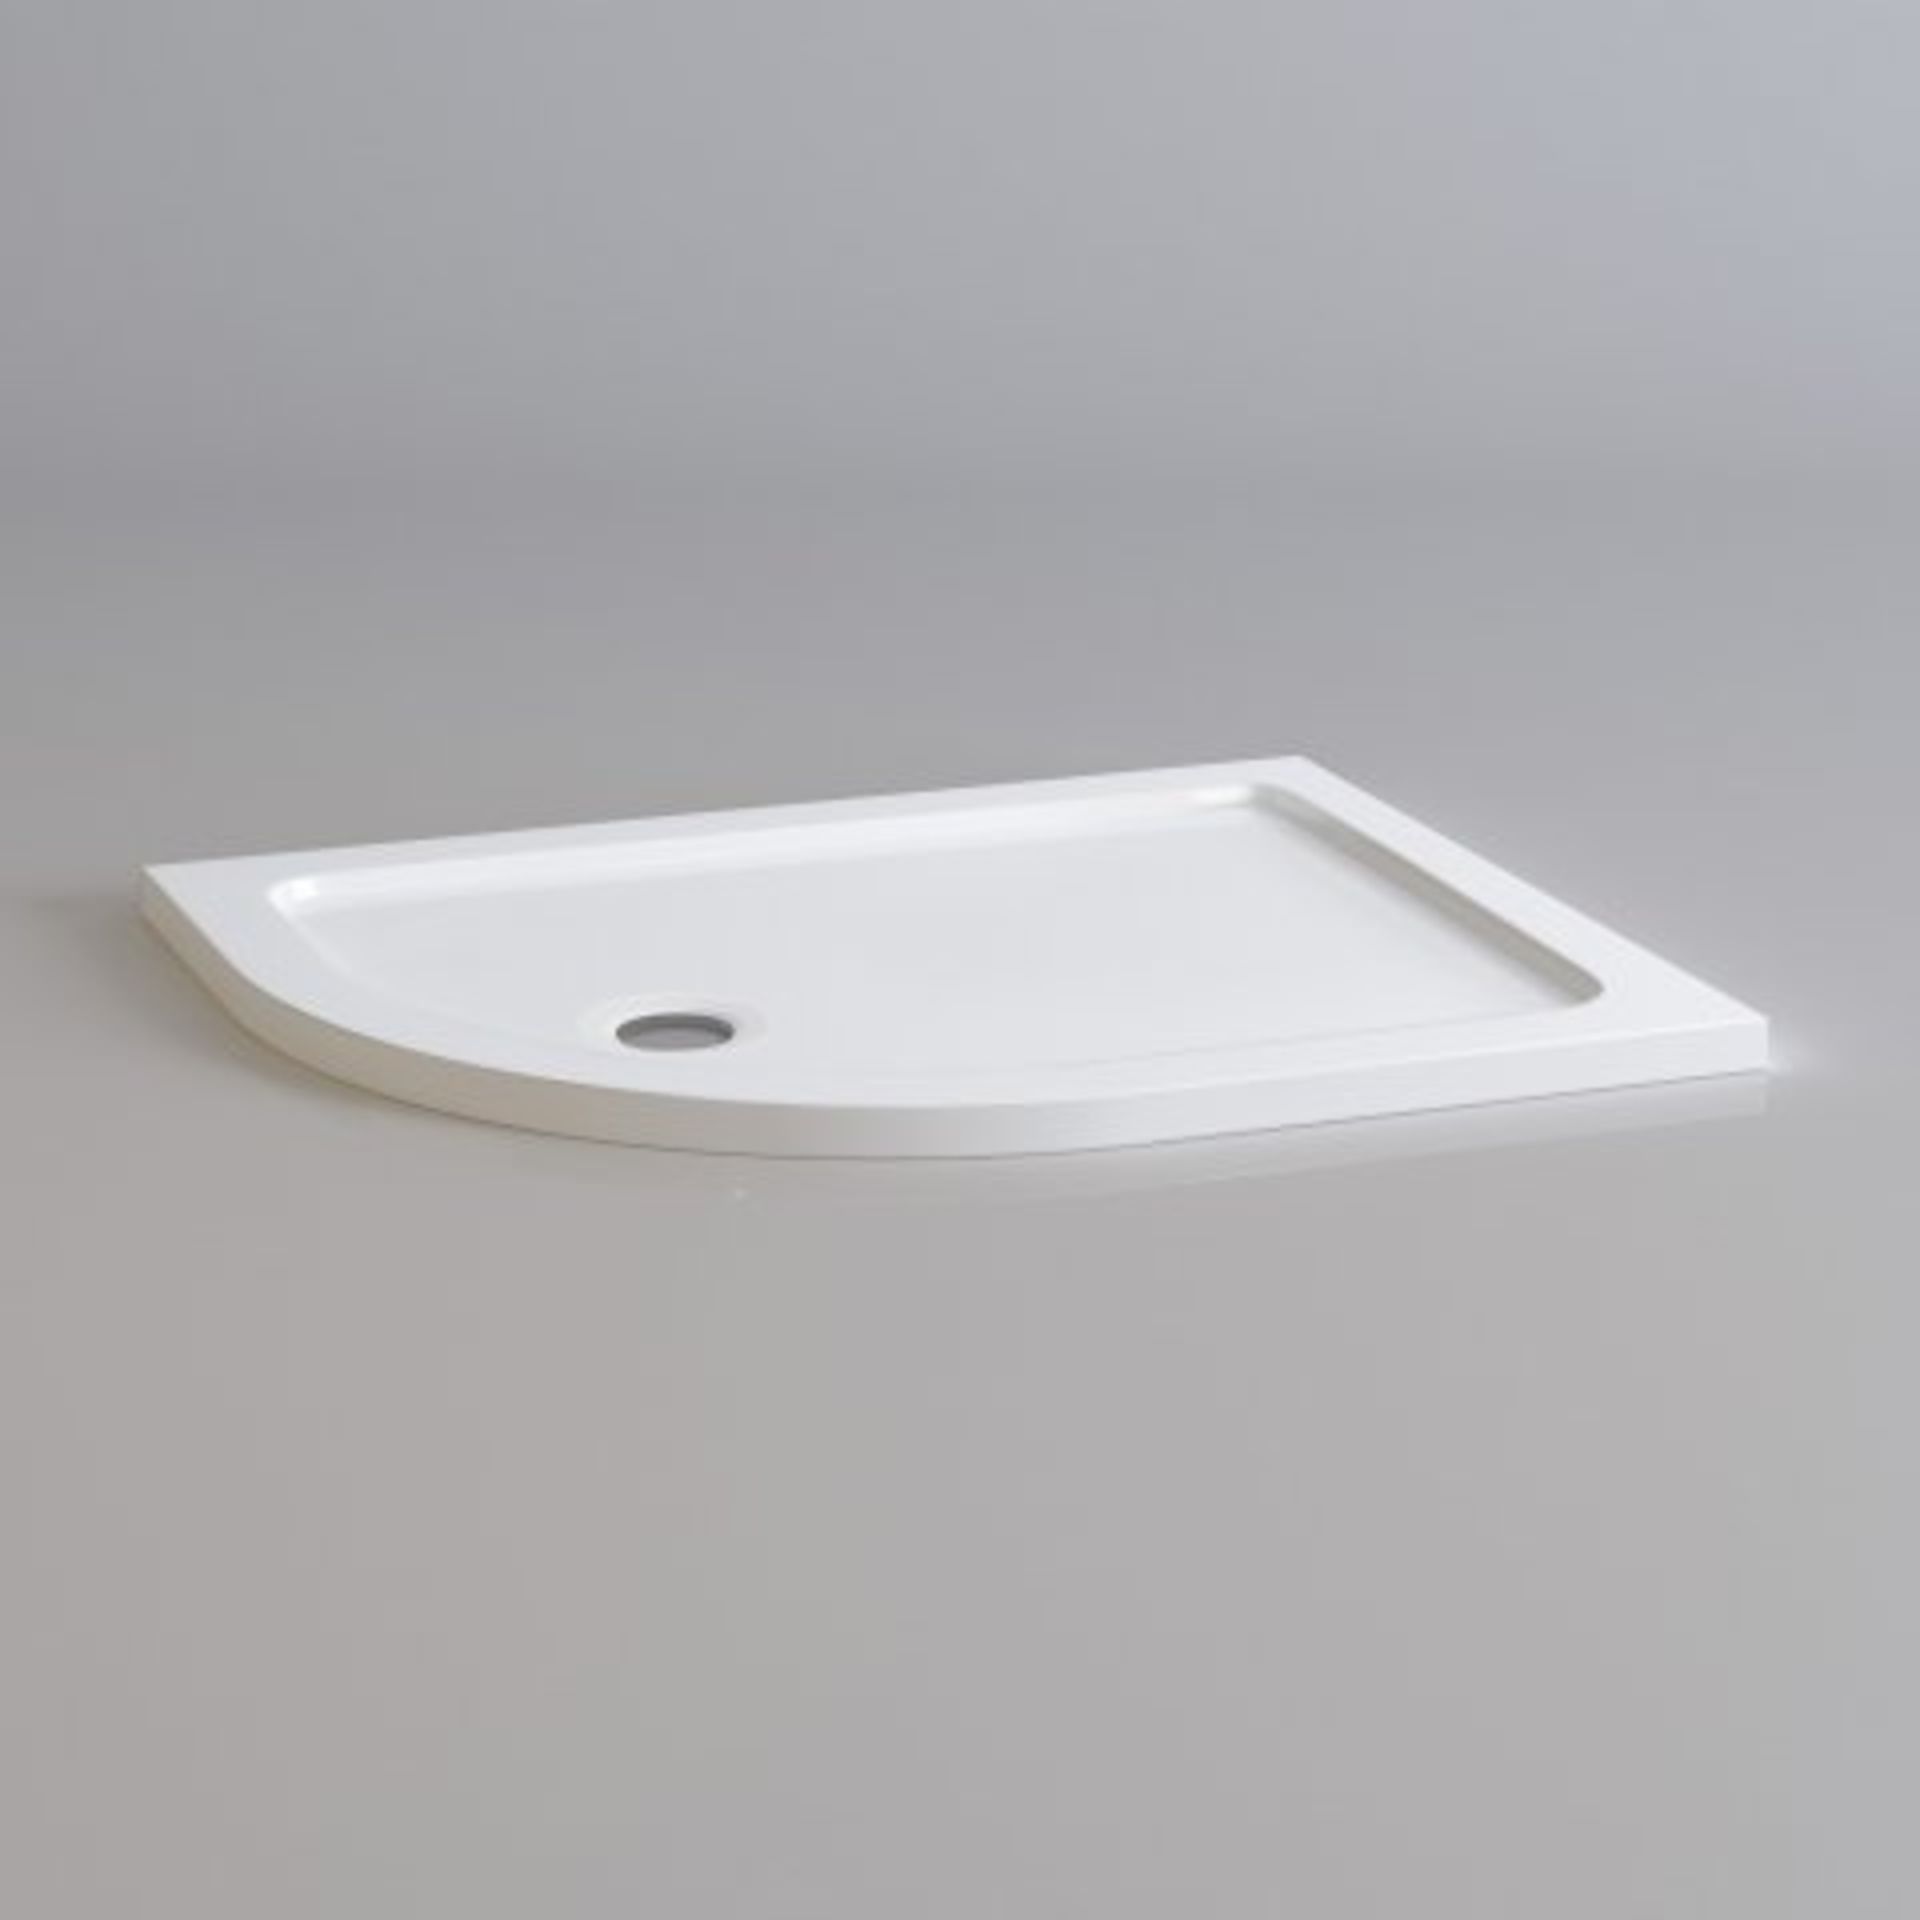 (O245) 1000x800mm Offset Quadrant Ultraslim Stone Shower Tray - Left. RRP £249.99. Designed and made